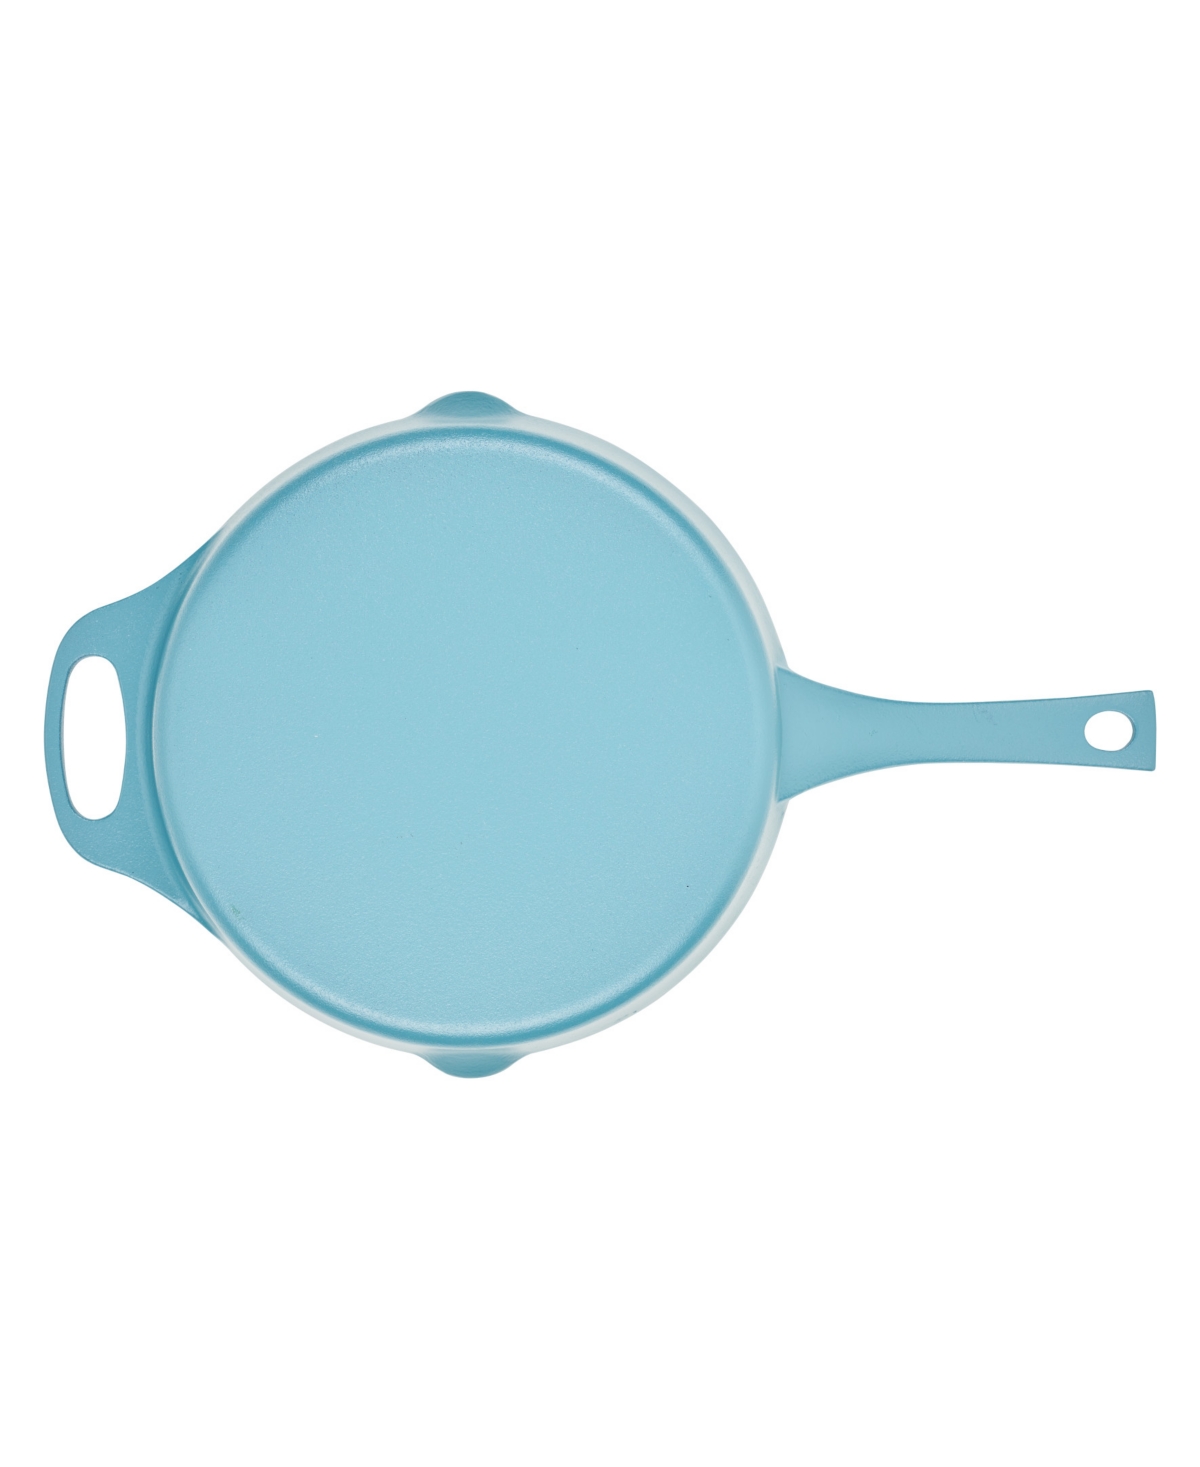 Shop Rachael Ray Nitro Cast Iron 10" Skillet In Agave Blue